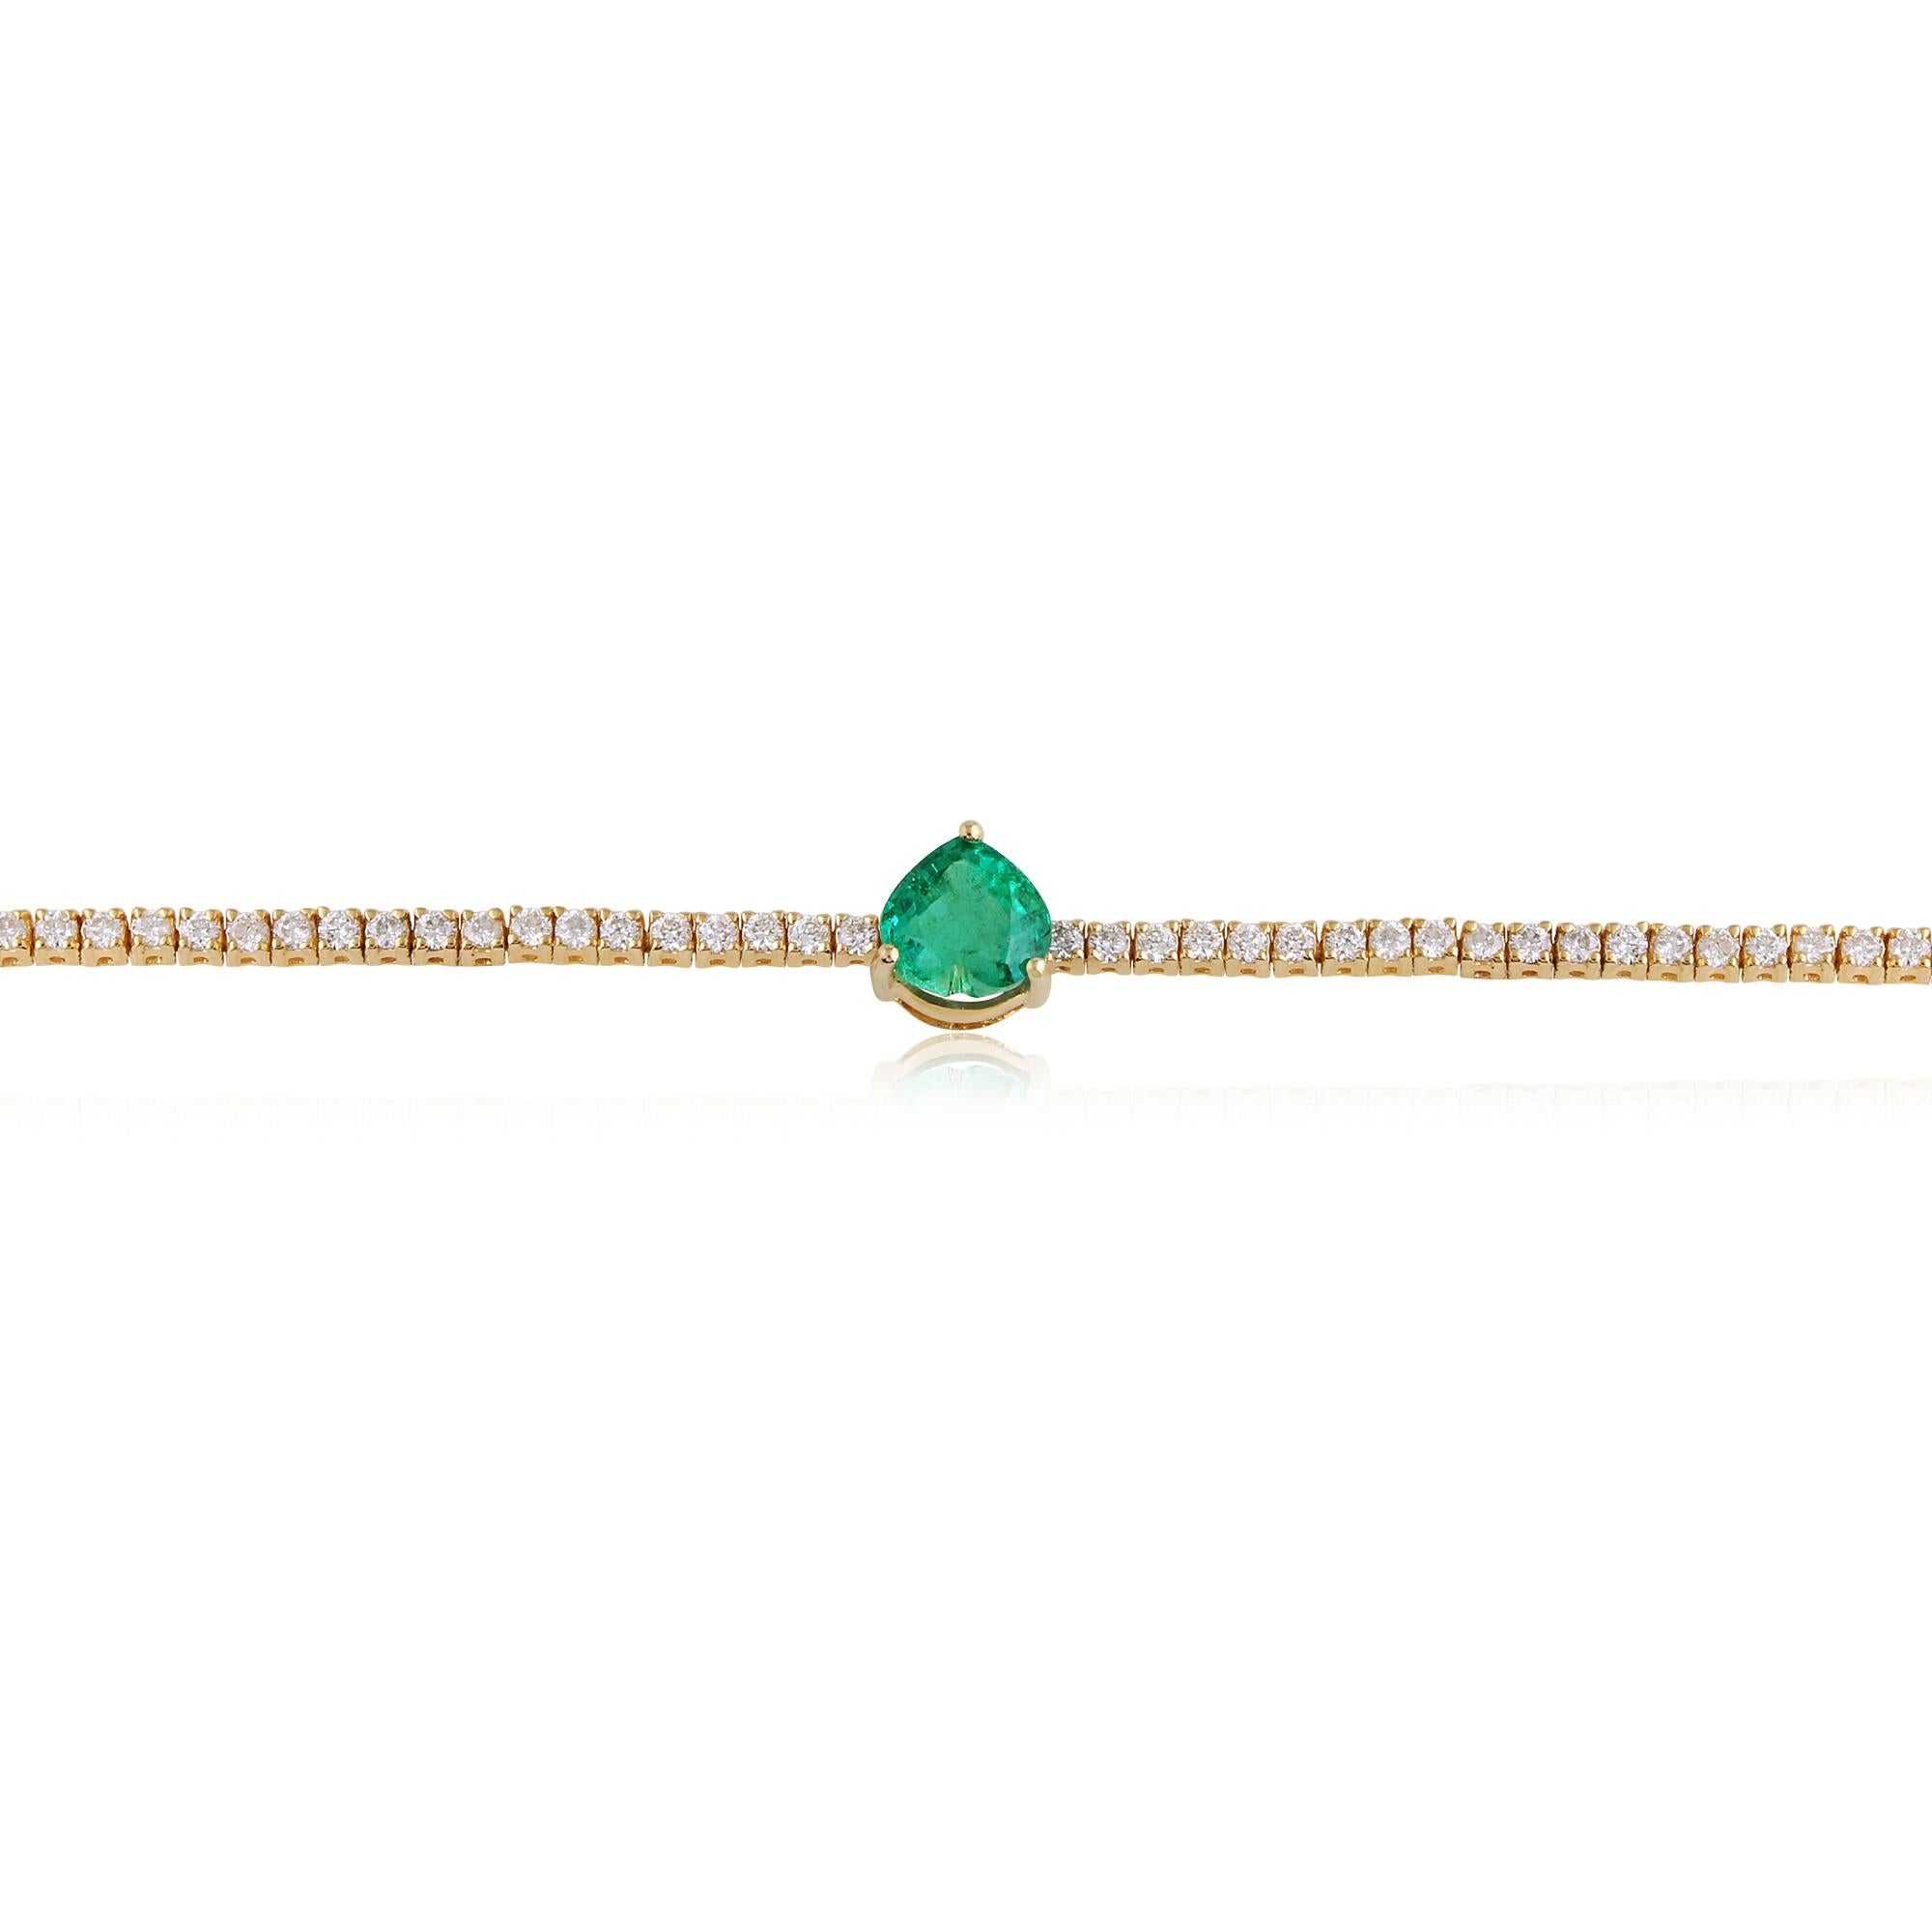 Item Code :- CN-40186
Gross Wt. :- 8.74 gm
18k Yellow Gold Wt. :- 8.12 gm
Natural Diamond Wt. :- 1.65 Ct.  ( AVERAGE DIAMOND CLARITY SI1-SI2 & COLOR H-I )
Emerald Wt. :- 1.45 Ct.
Bracelet Length :- 7 Inches Long

✦ Sizing
.....................
We